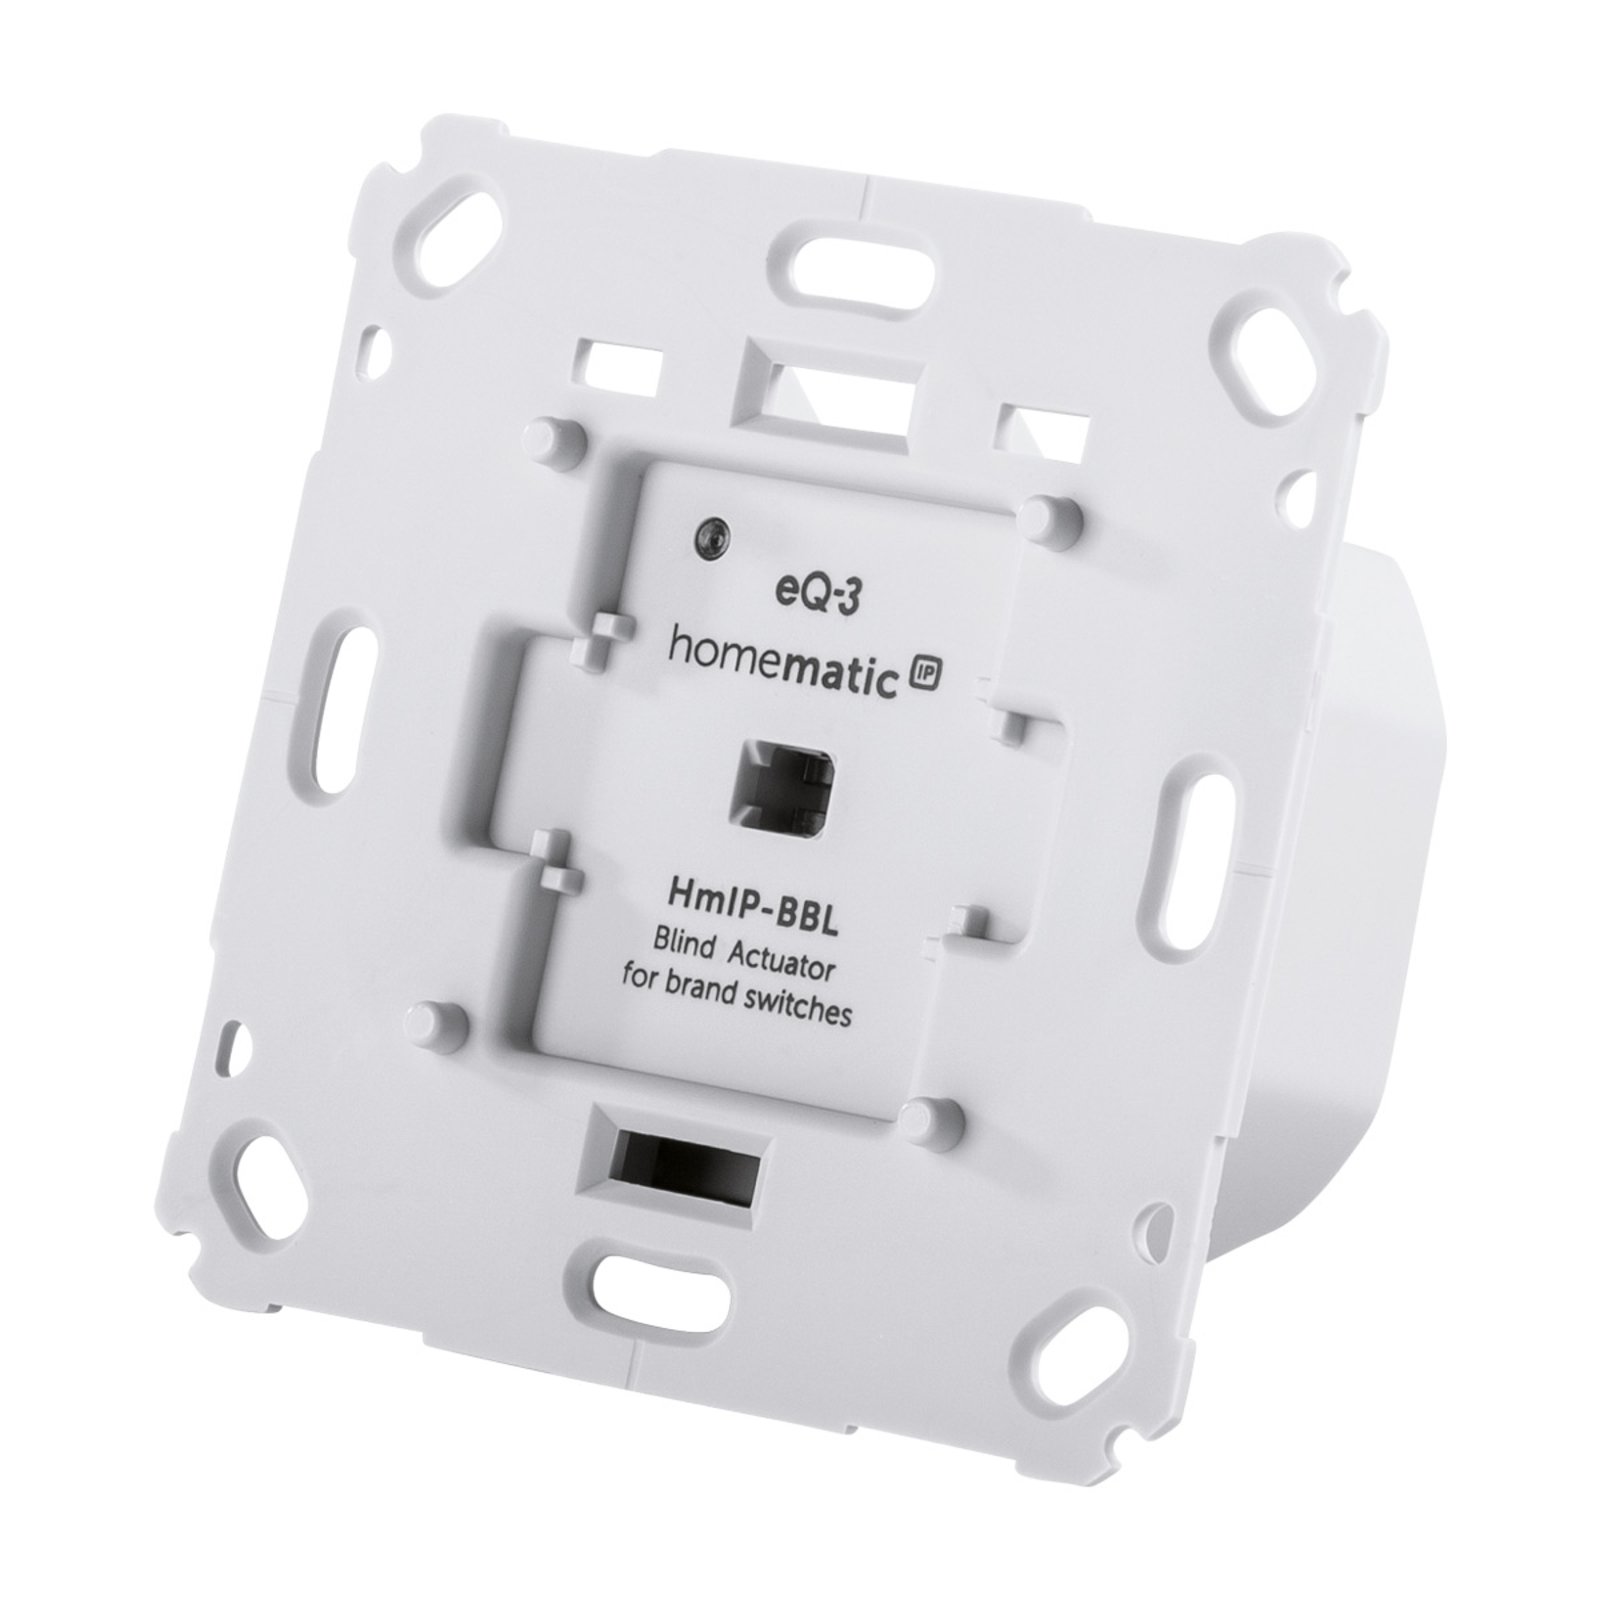 Homematic IP blind actuator for brand switches